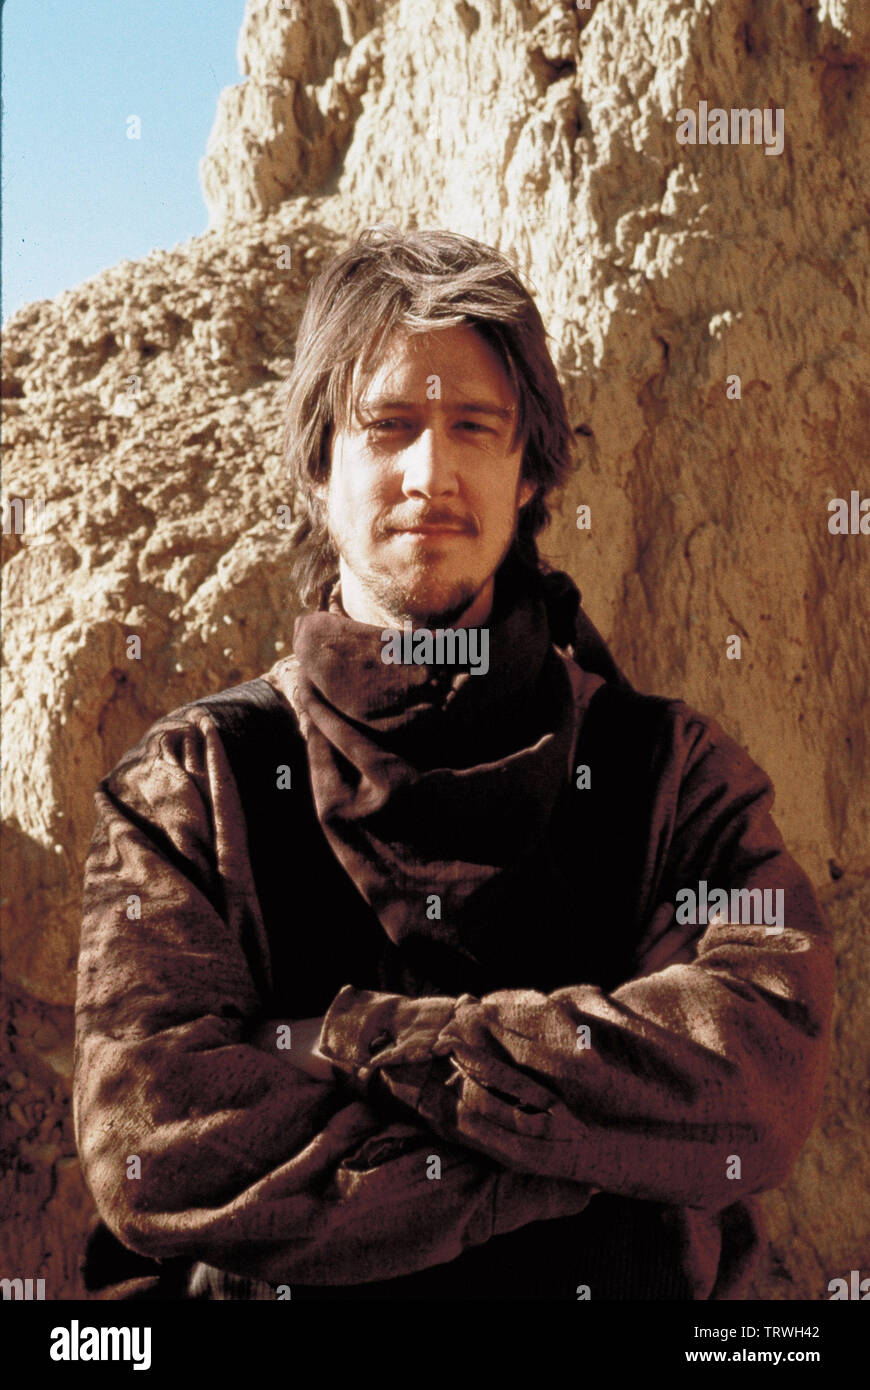 EDWARD NORTON in YOUNG GUNS II (1990). Copyright: Editorial use only. No merchandising or book covers. This is a publicly distributed handout. Access rights only, no license of copyright provided. Only to be reproduced in conjunction with promotion of this film. Credit: 20TH CENTURY FOX / GLASS, BEN / Album Stock Photo